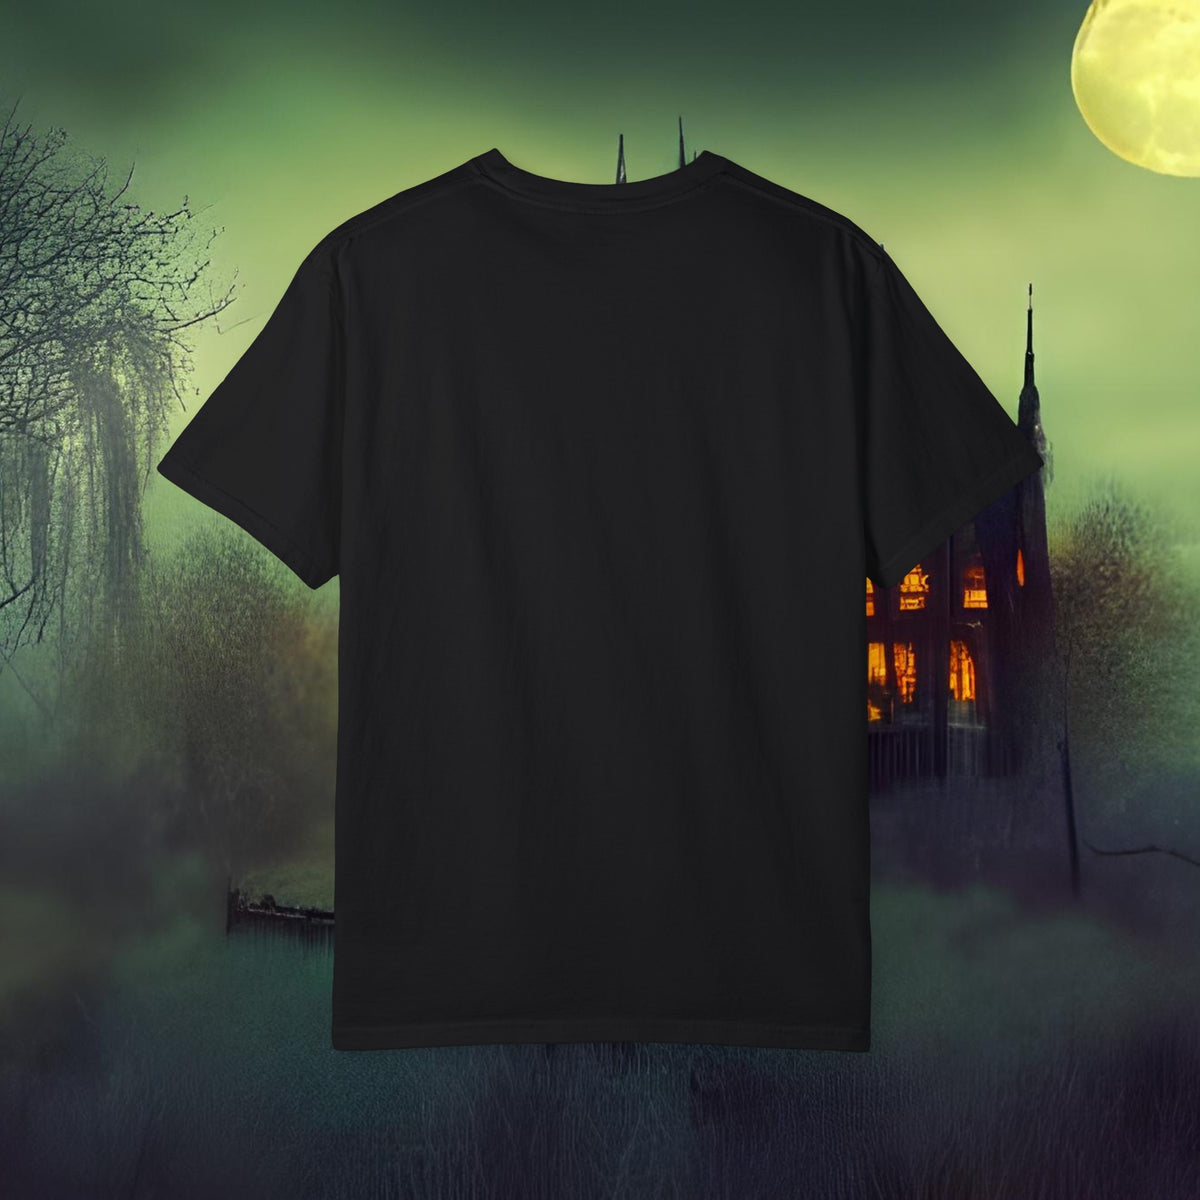 It's a Full Moon Tonight Witchy Cat Graphic Tee - Comfy Relaxed Fit Top - Kawaii Esquire